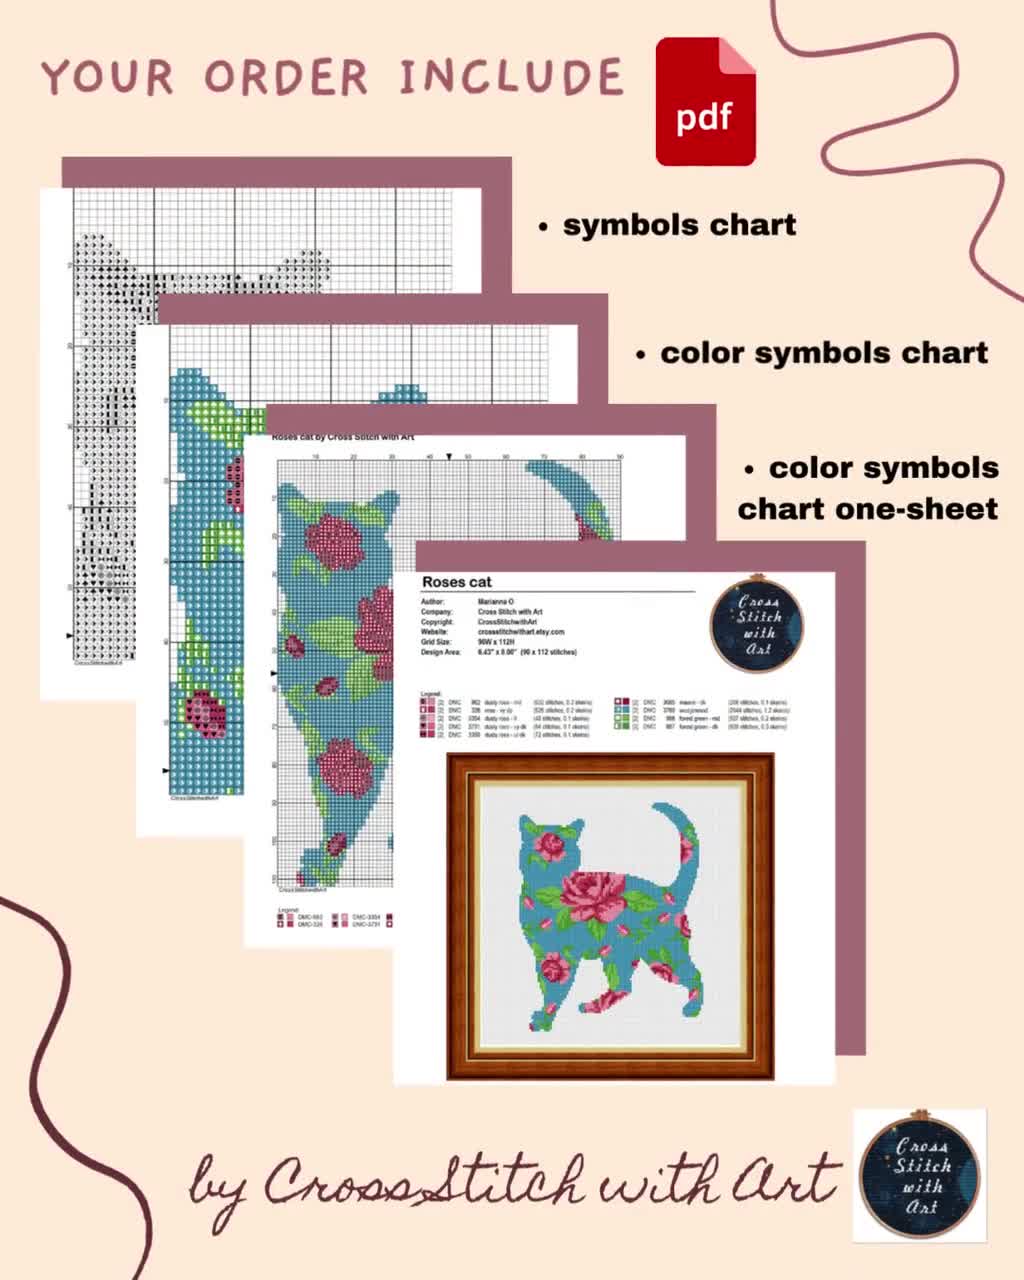 CHAT] Does anyone have experience buying patterns from Cross